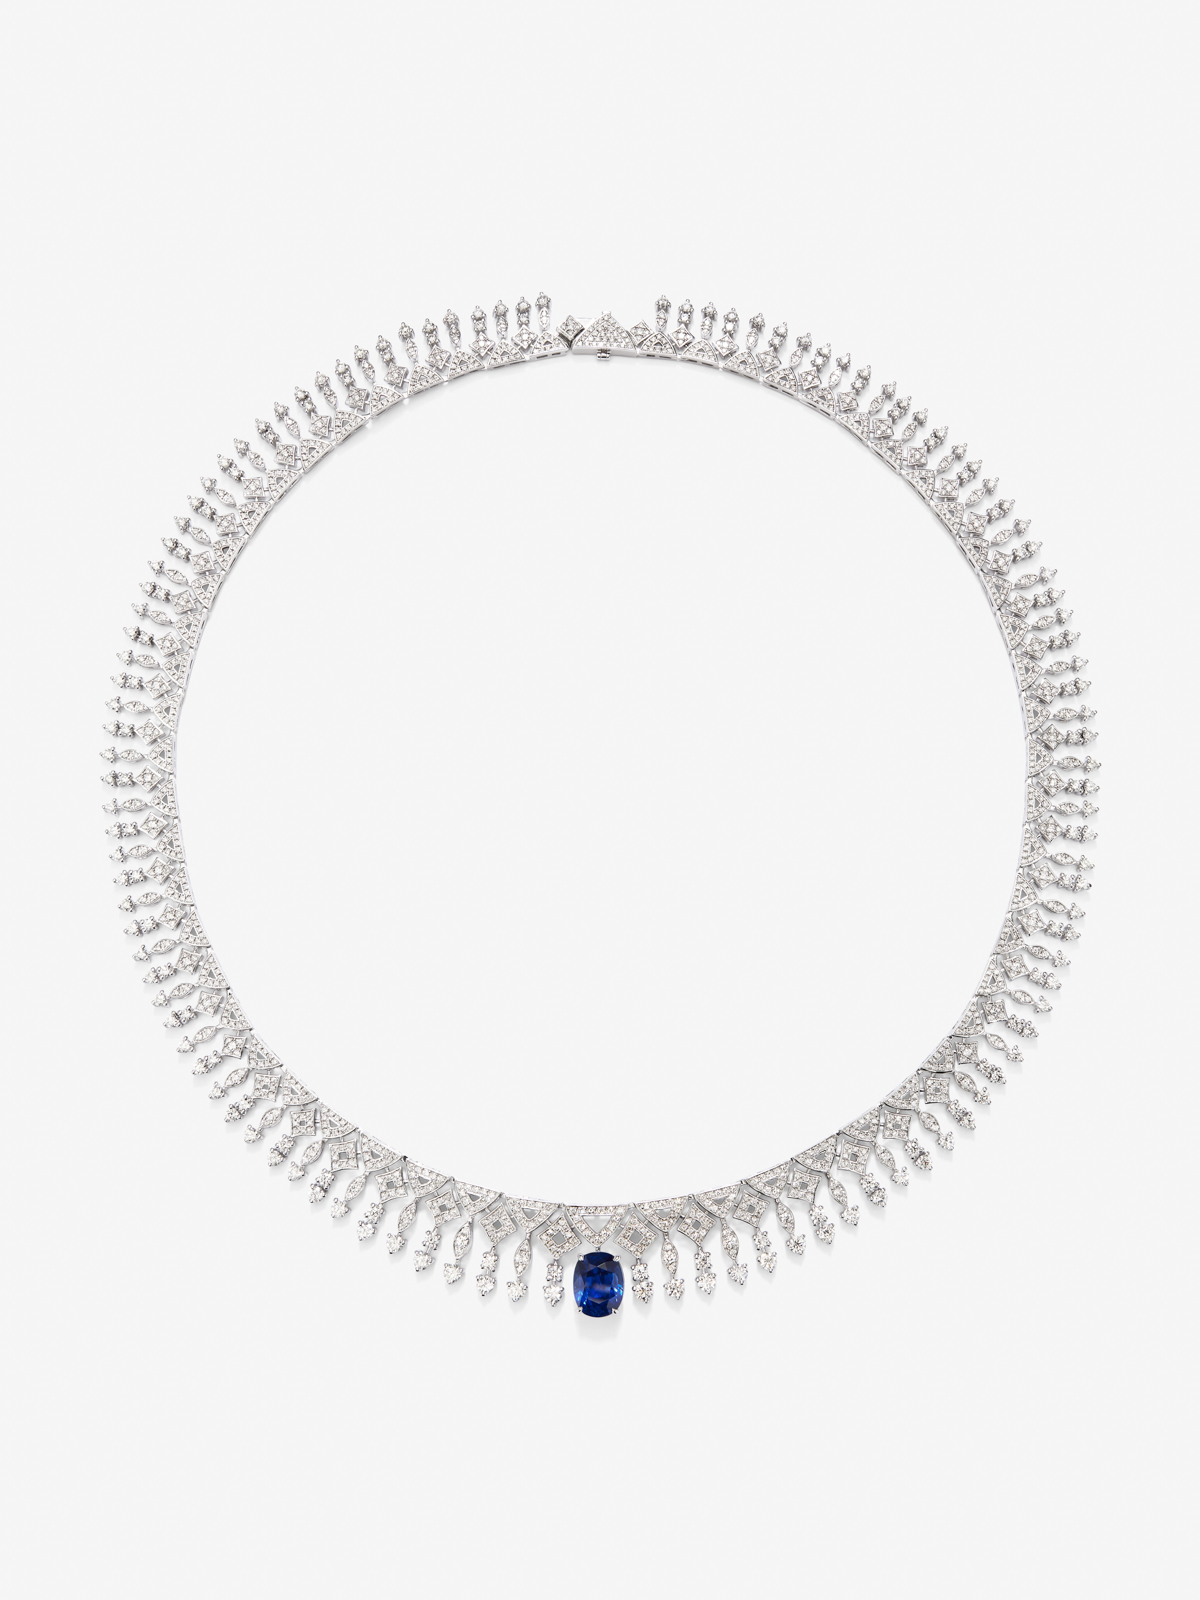 18K white gold necklace with Royal blue sapphire in 3.92 oval size and white diamonds of 9.27 cts